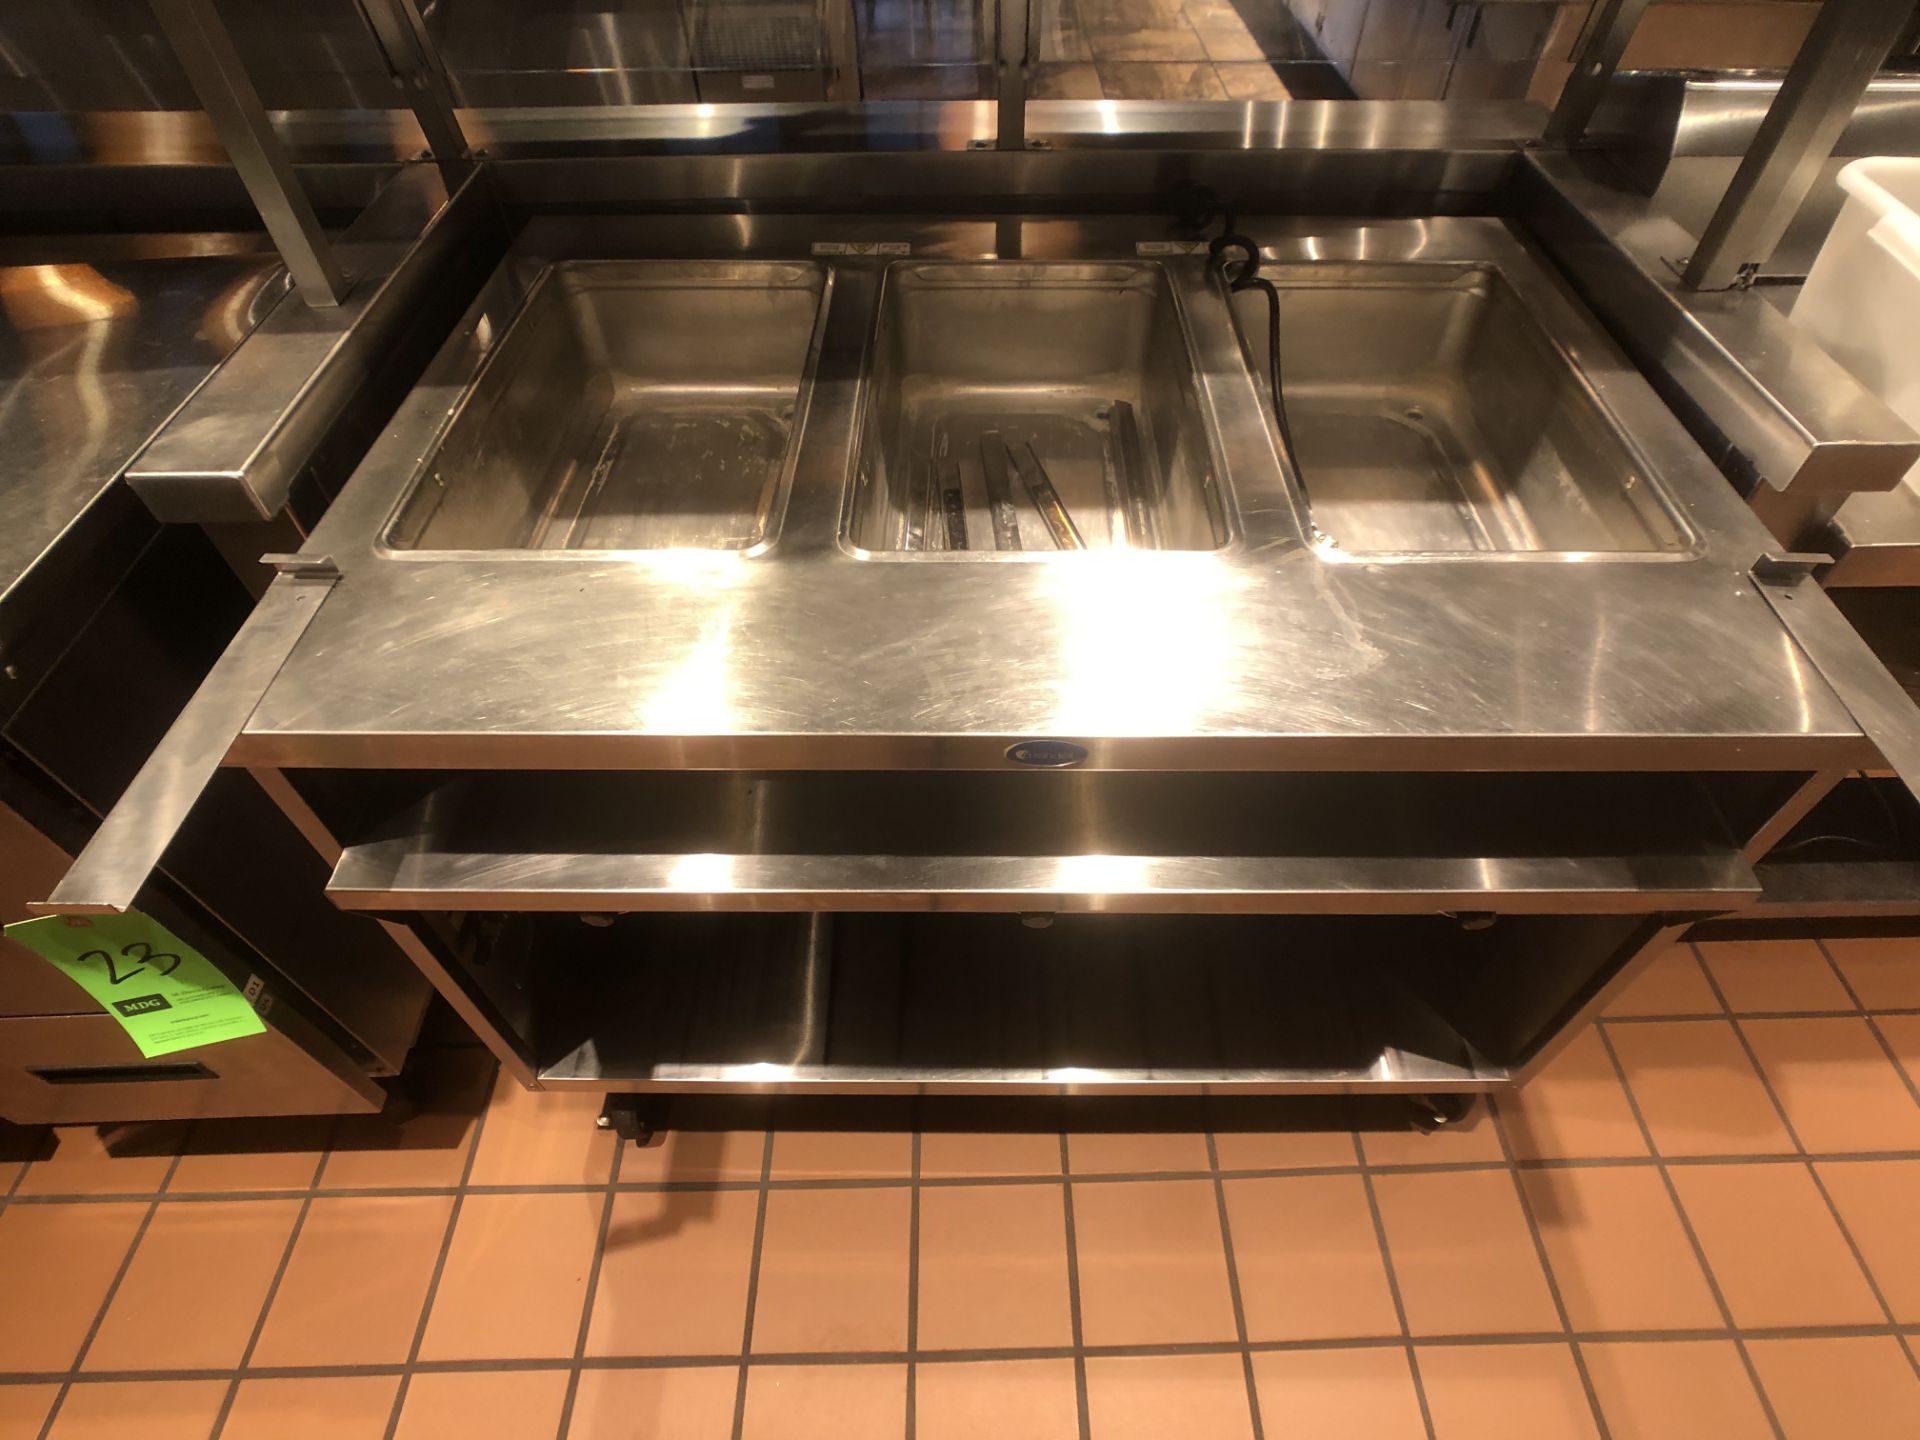 Randell Open Base Electric Hot Food Table, Model 3613-240, S/N W1041760-1, 48" W x 33" D x 36" H - Image 2 of 4